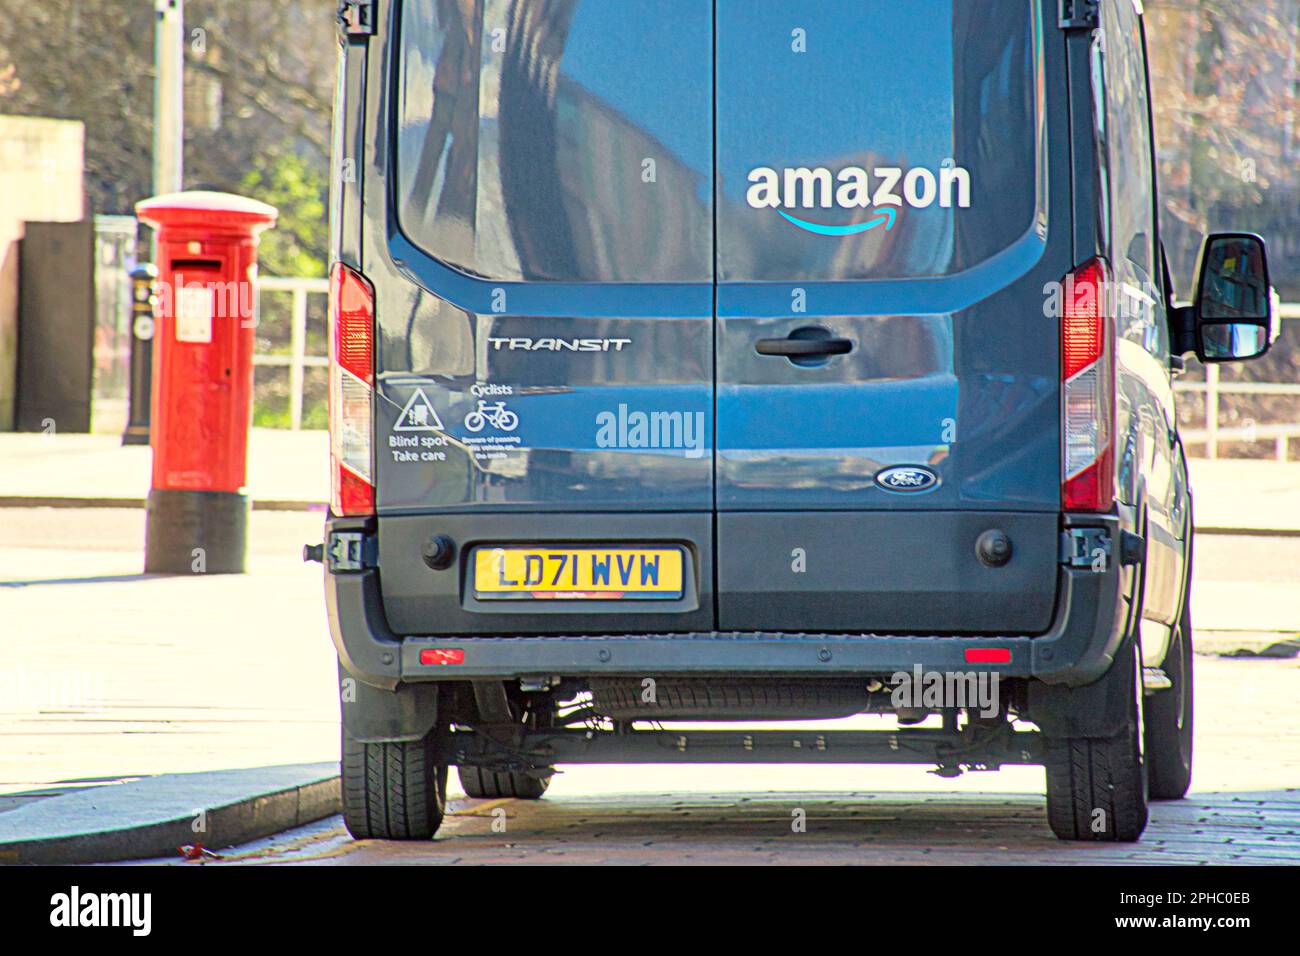 amazon delivery van in front of red royal mail post box to illustrate amazon using royal mail to deliver packages Stock Photo